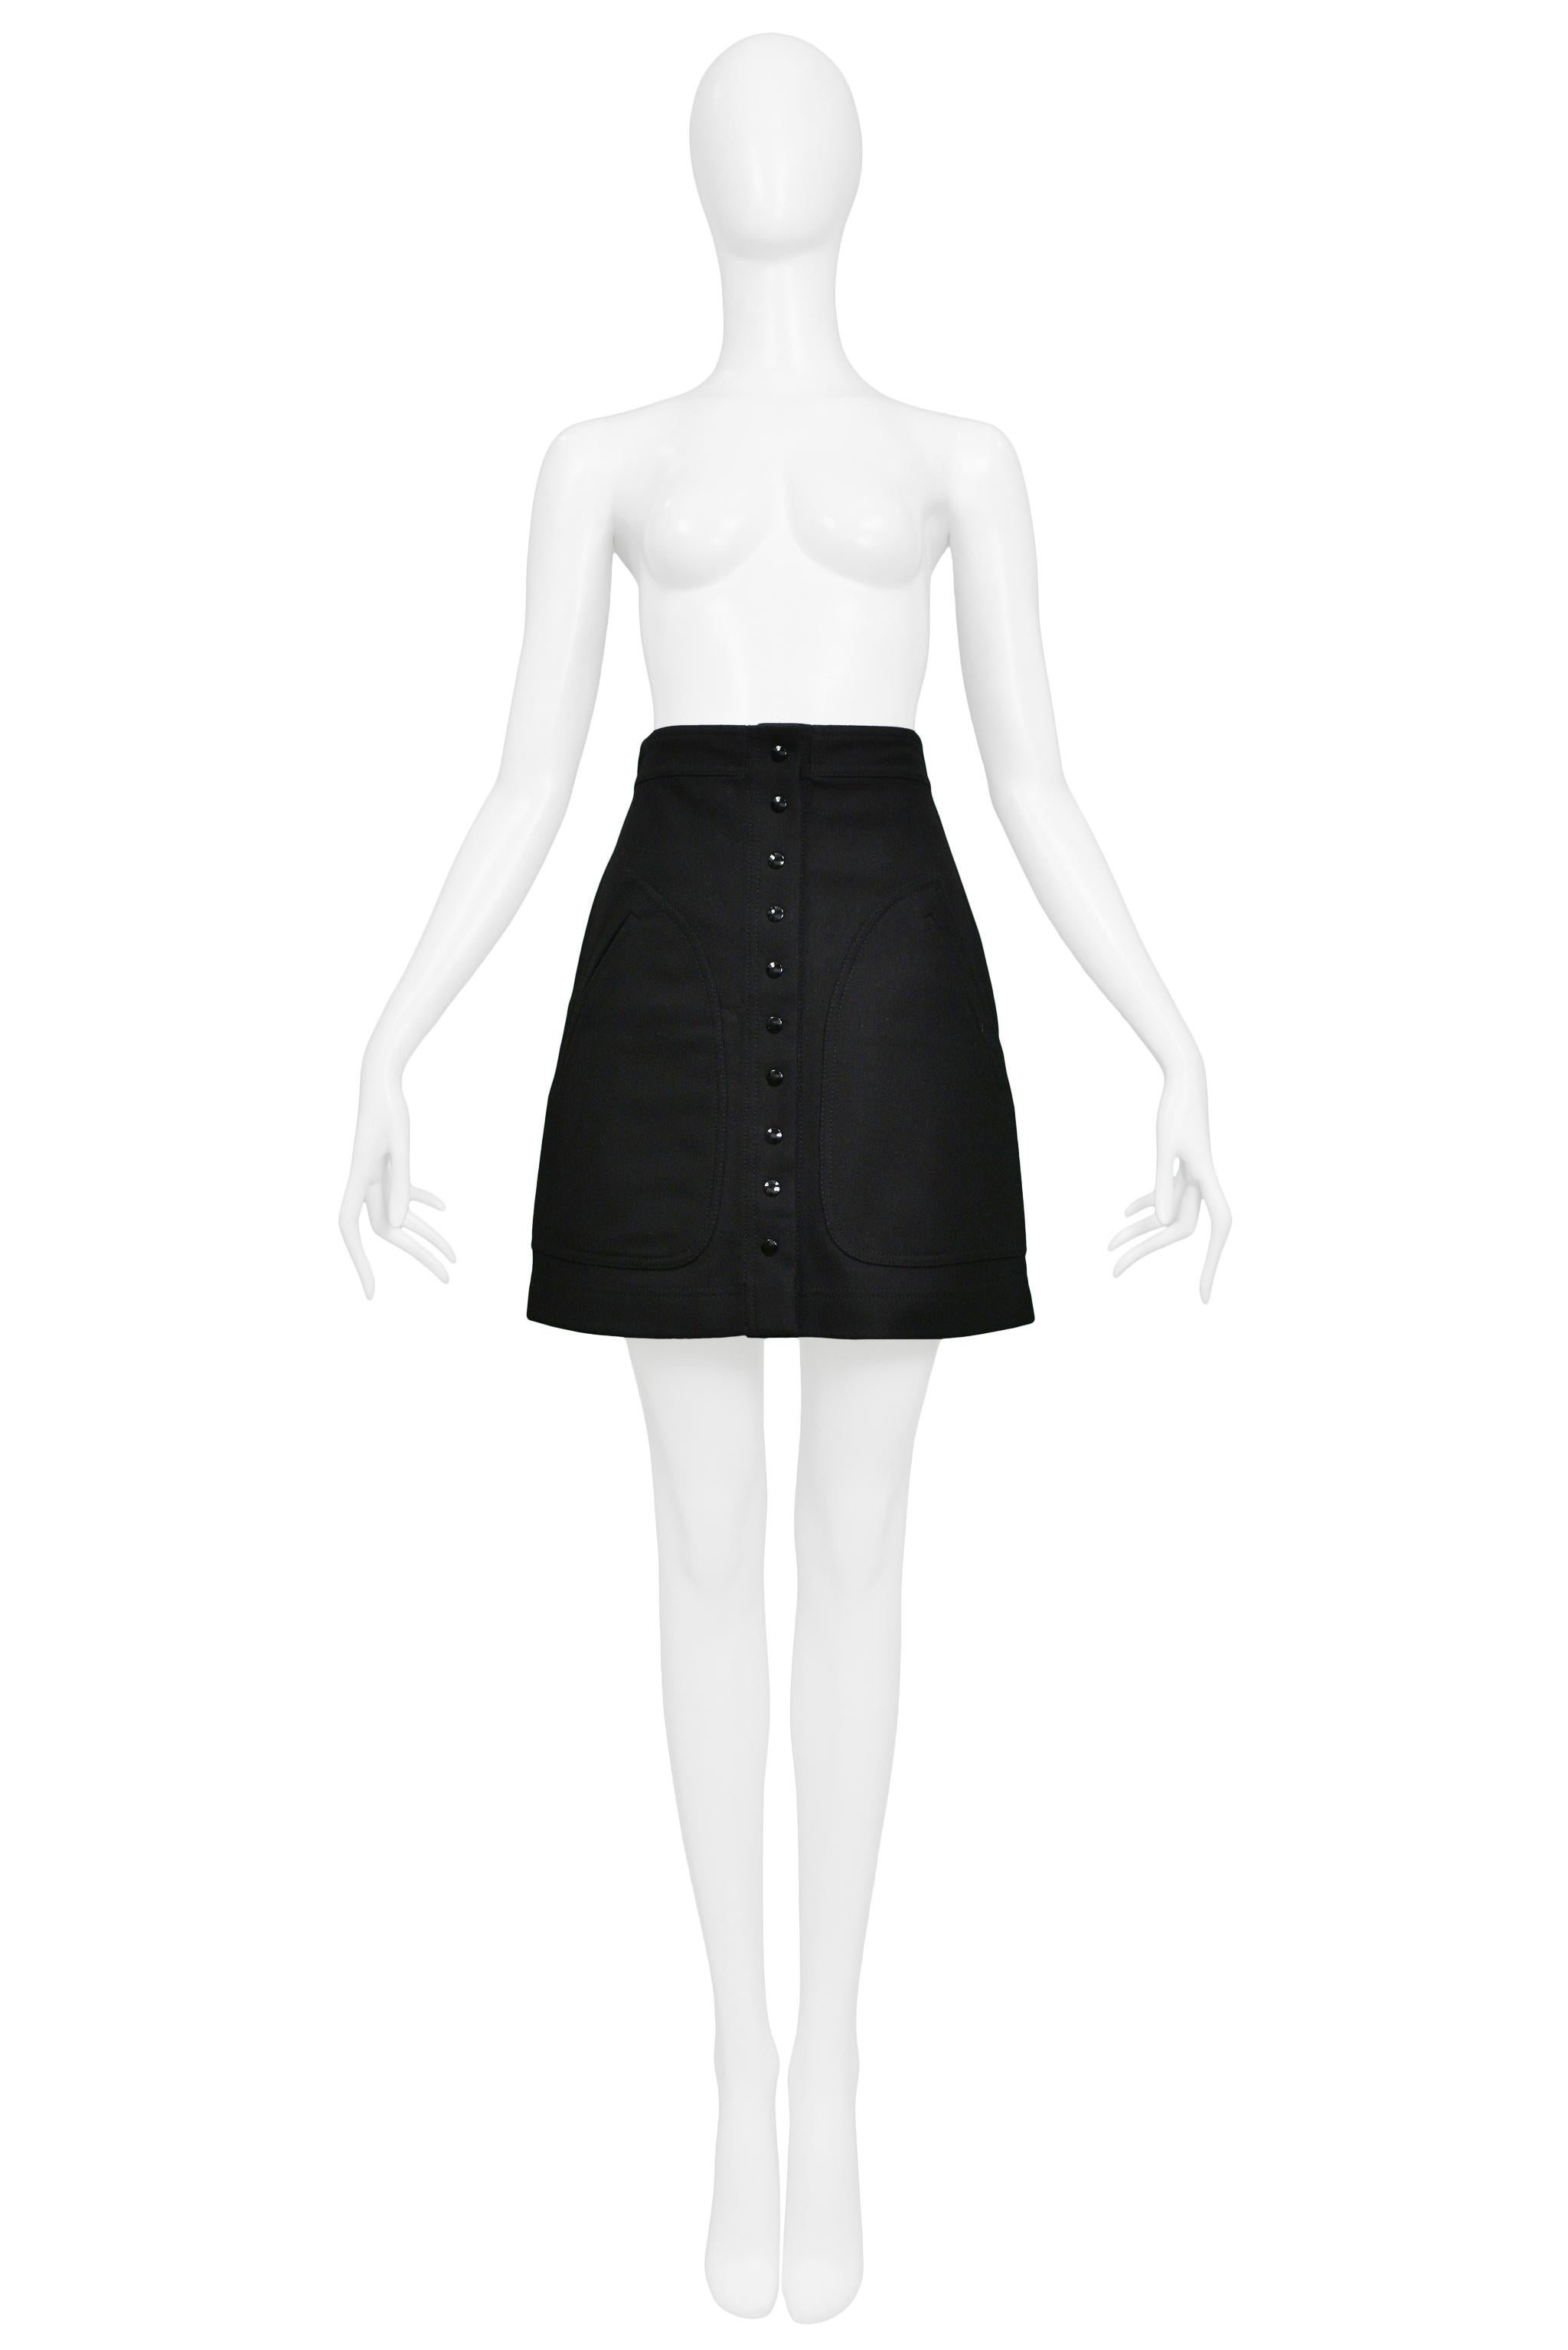 Resurrection Vintage is excited to offer a vintage Nicolas Ghesquière black a-line skirt featuring a high structured waistband, black snaps down the center front of the skirt, and large side pockets with decorative stitching. 

Balenciaga